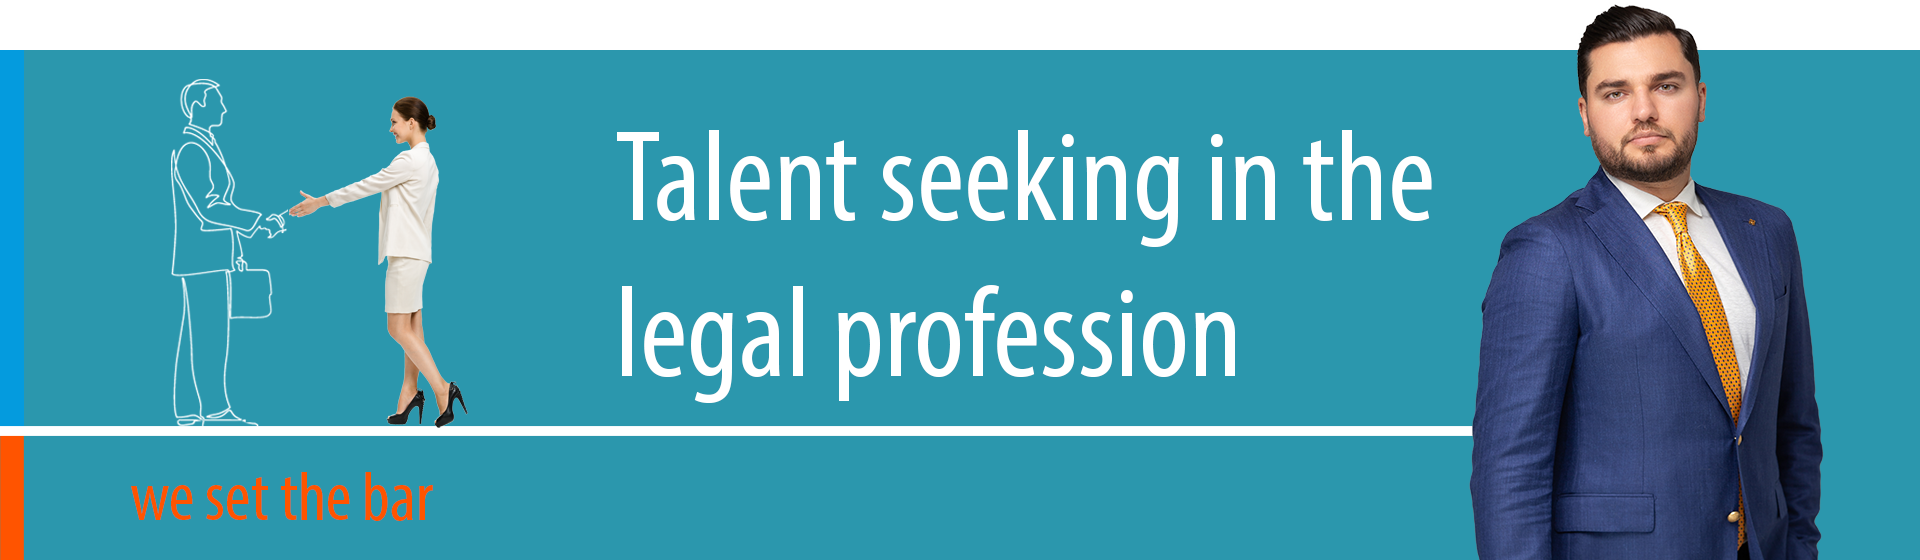 banner - talent seeking in the legal profession